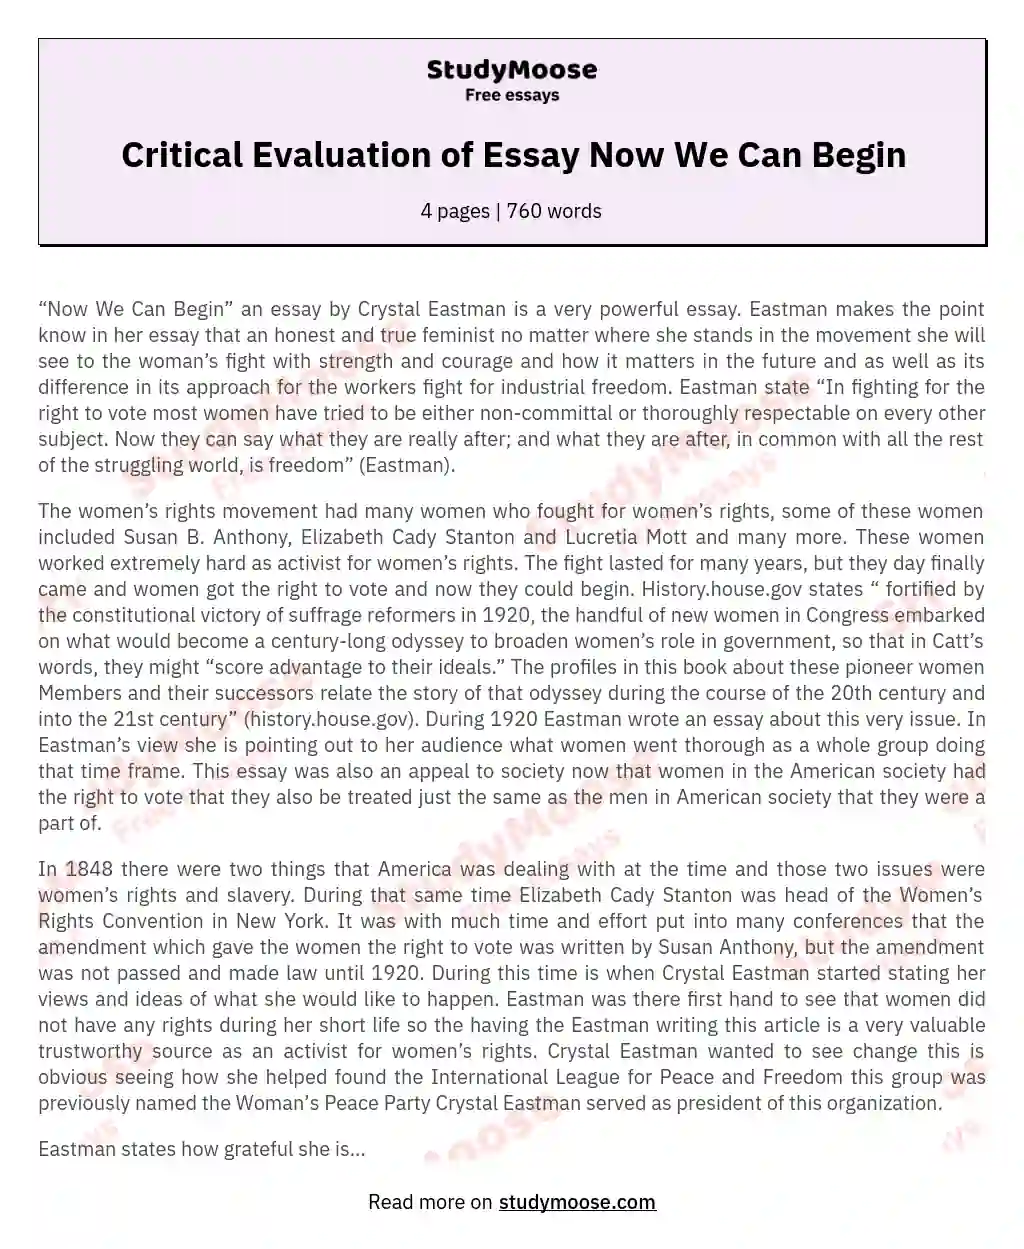 Critical Evaluation of Essay Now We Can Begin